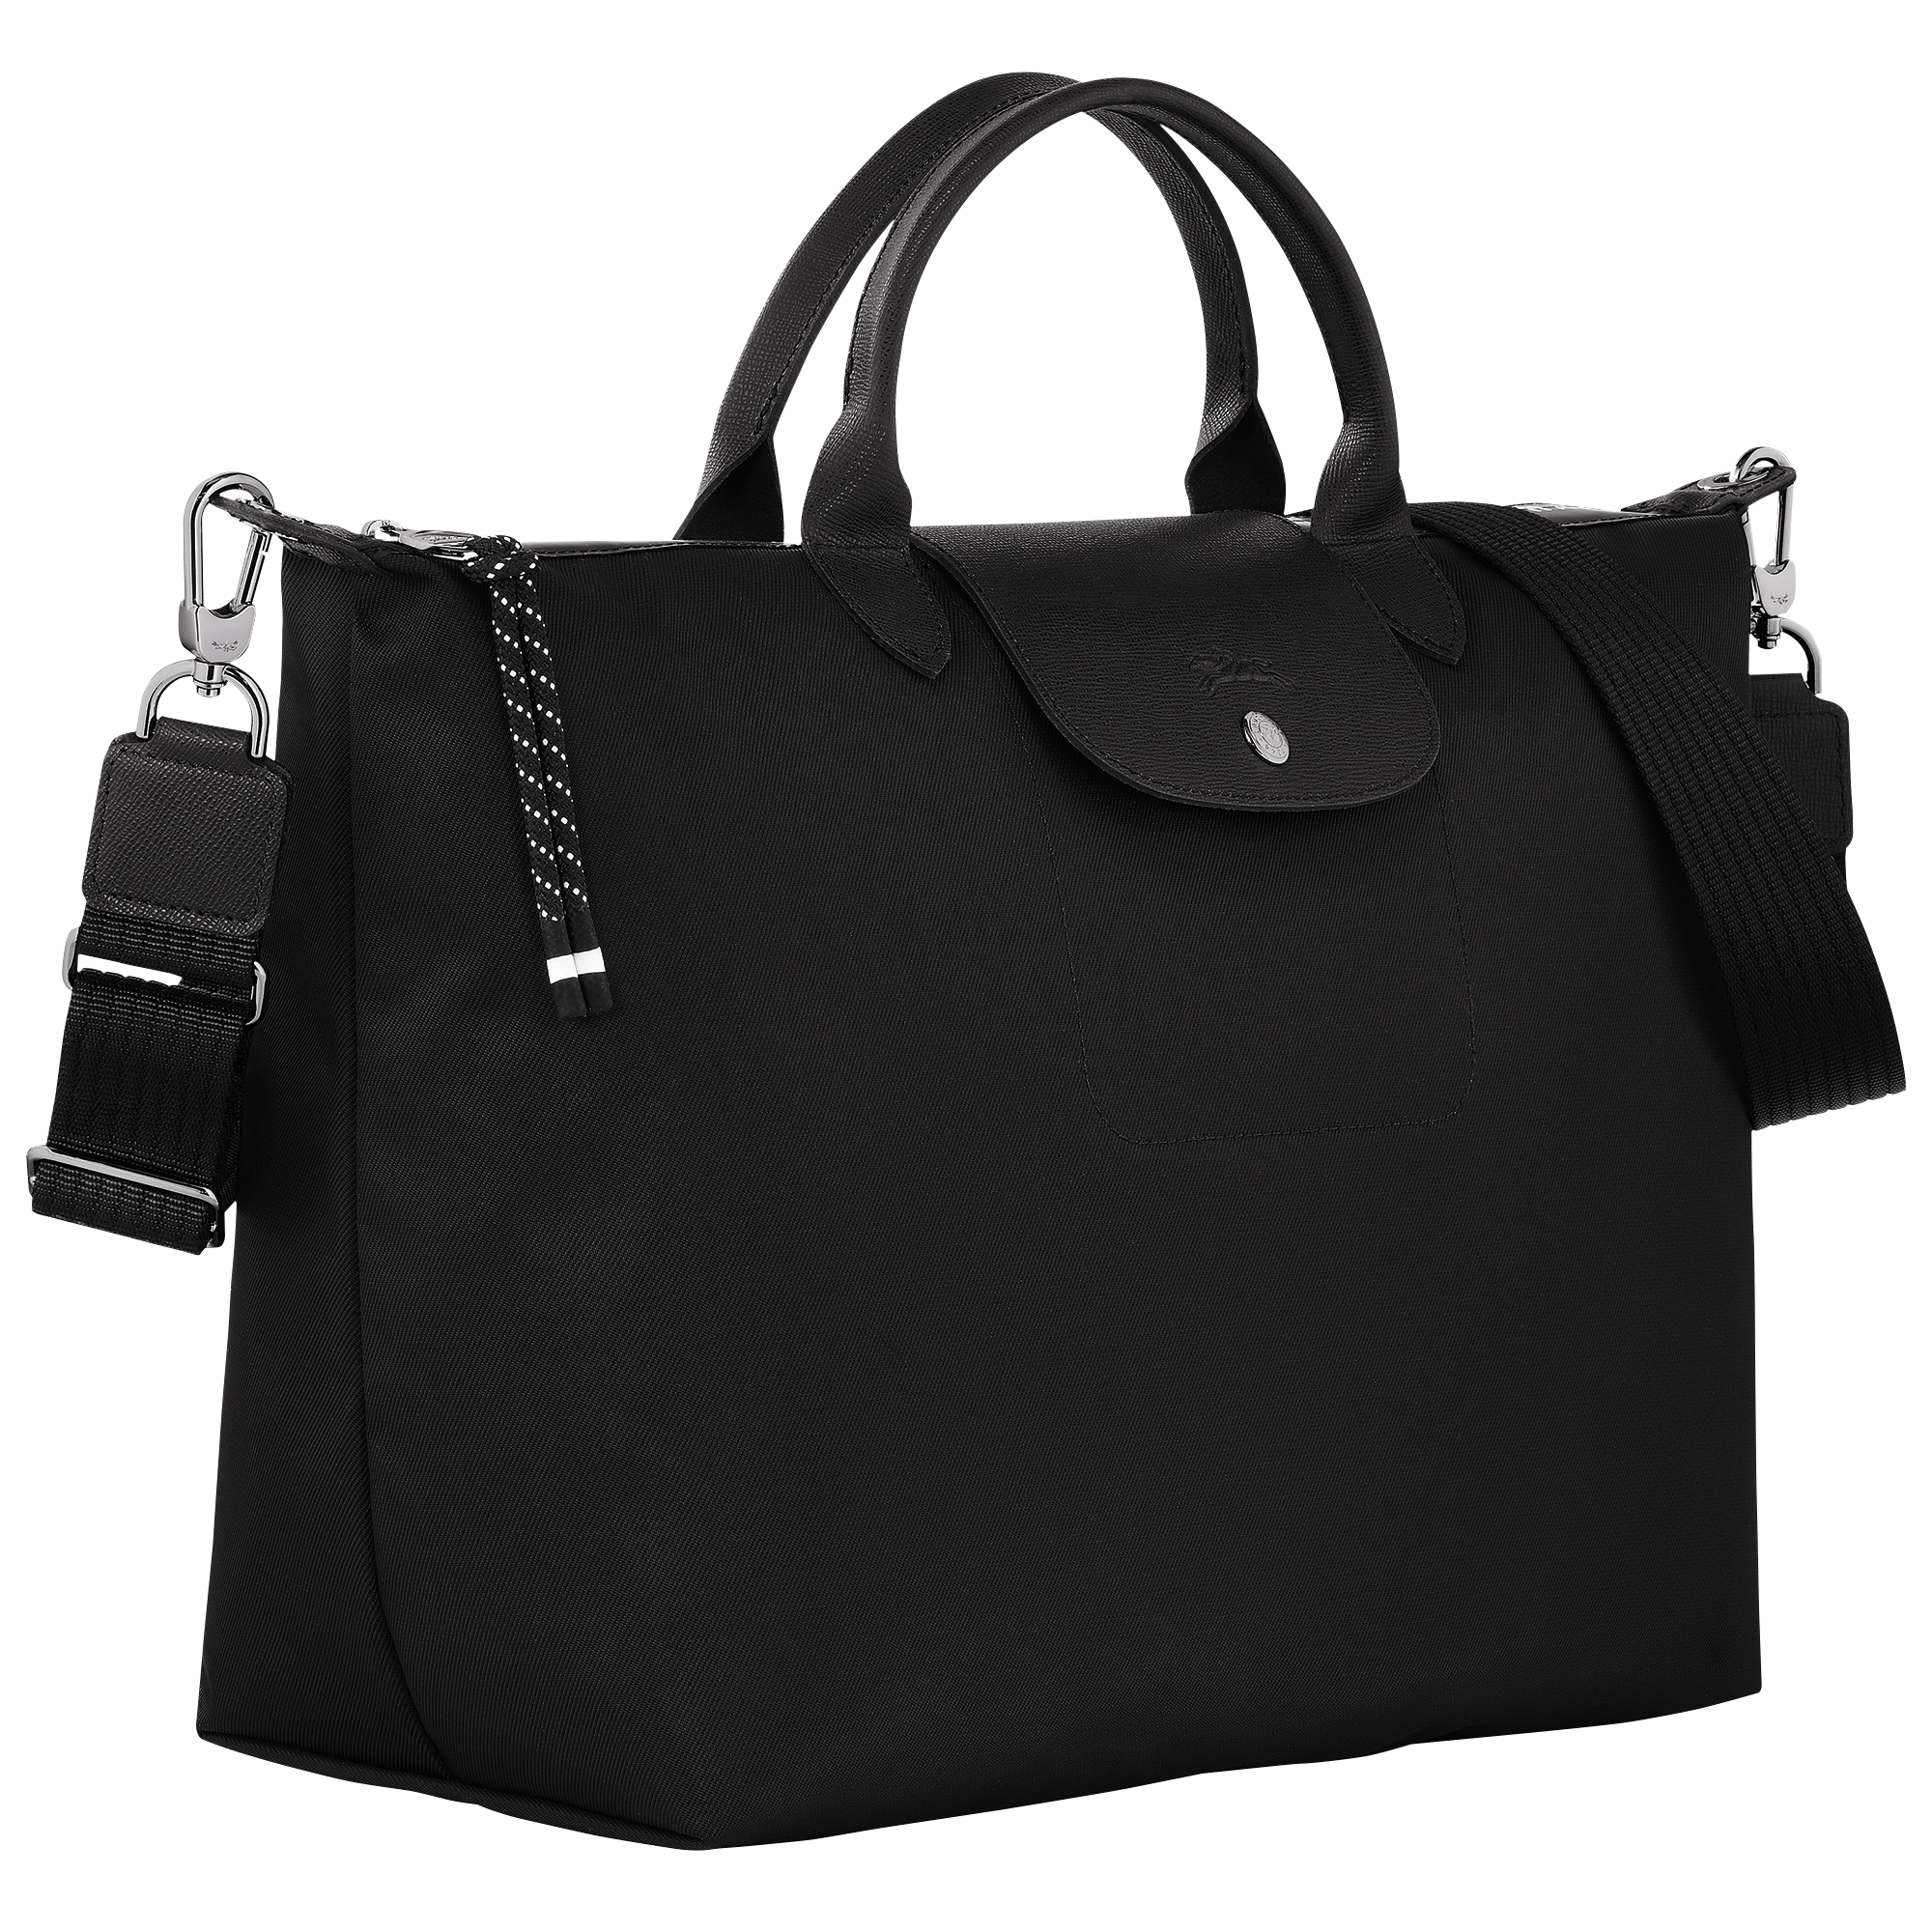 Le Pliage Energy L Tote bag Black - Recycled canvas (10163HSR001